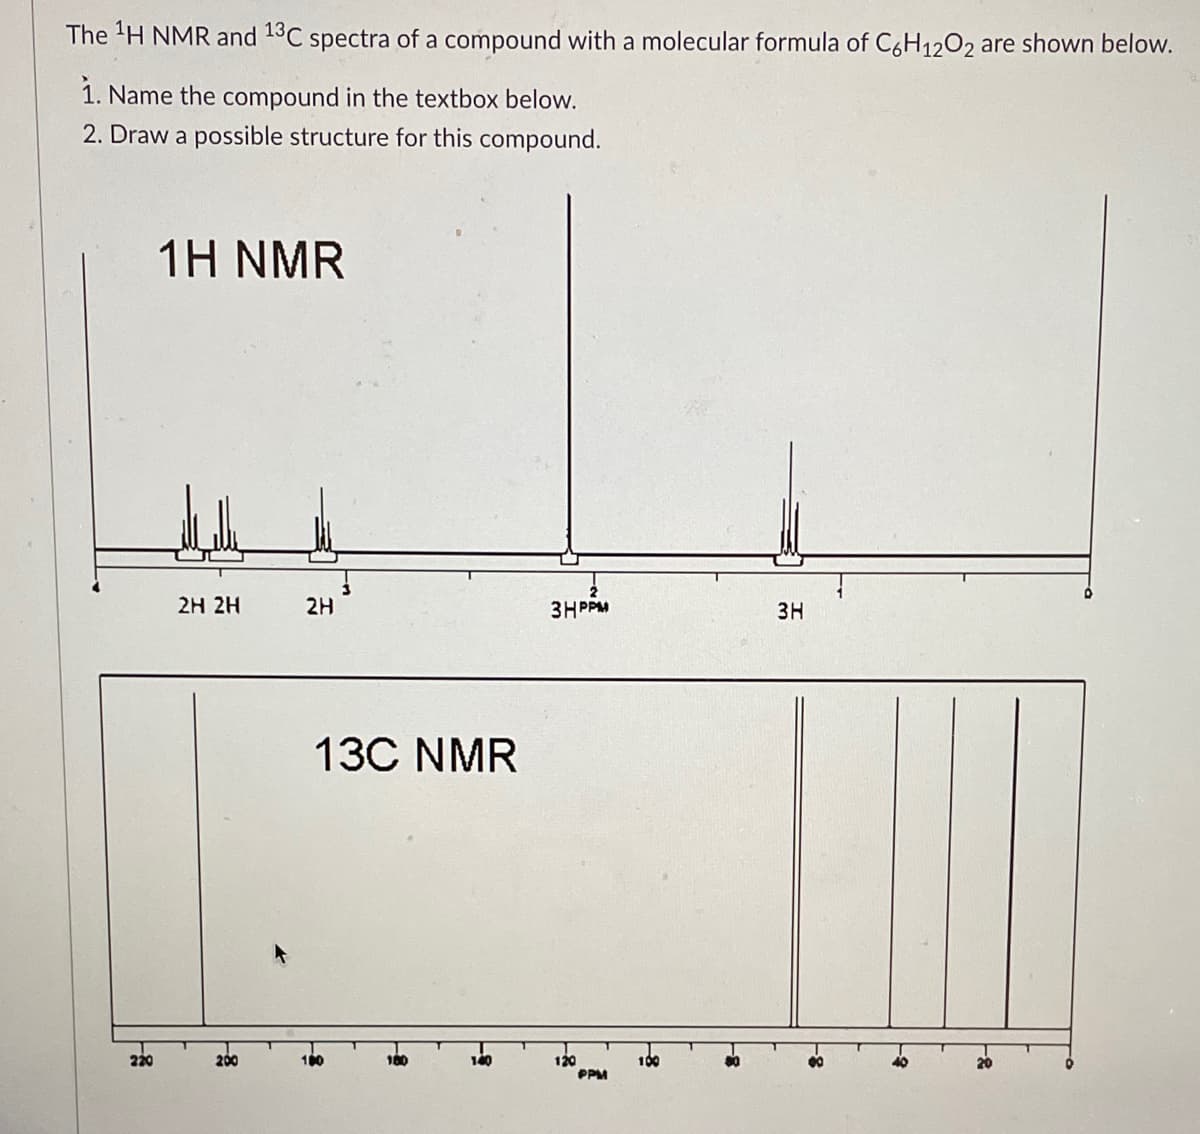 The 'H NMR and 13C spectra of a compound with a molecular formula of C6H12O2 are shown below.
1. Name the compound in the textbox below.
2. Draw a possible structure for this compound.
1Η NMR
2H 2H
2H
3HPPM
3H
13C NMR
220
200
100
140
100
120
PPM
